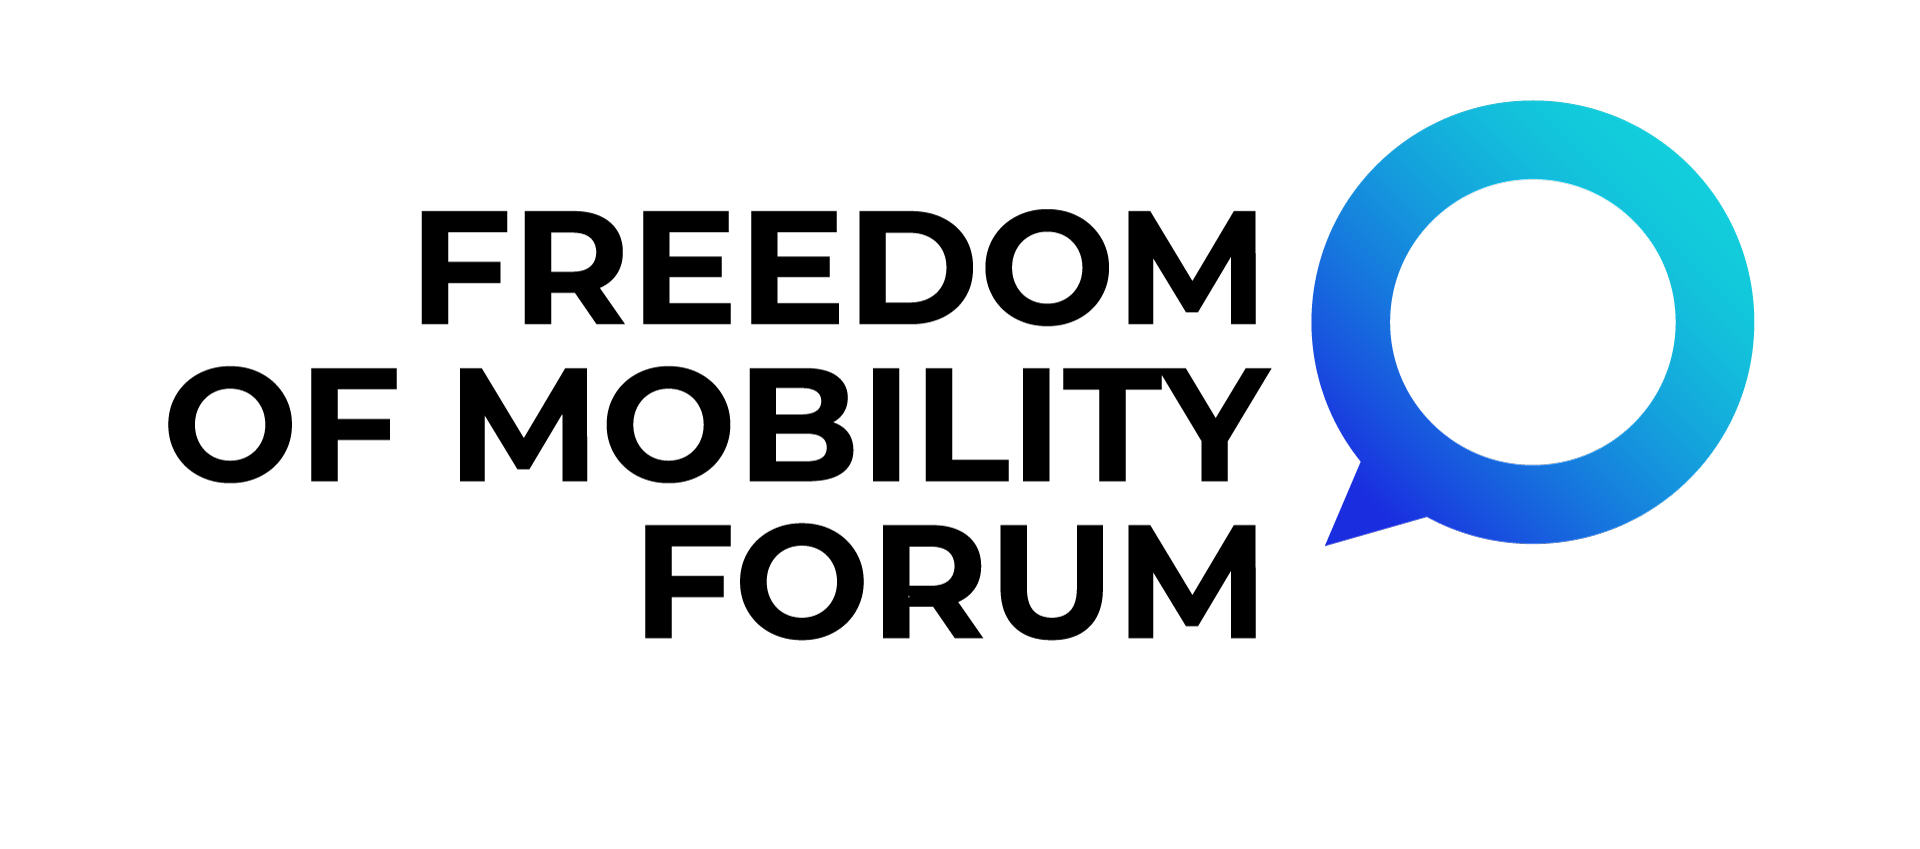 image of Freedom of mobility Forum